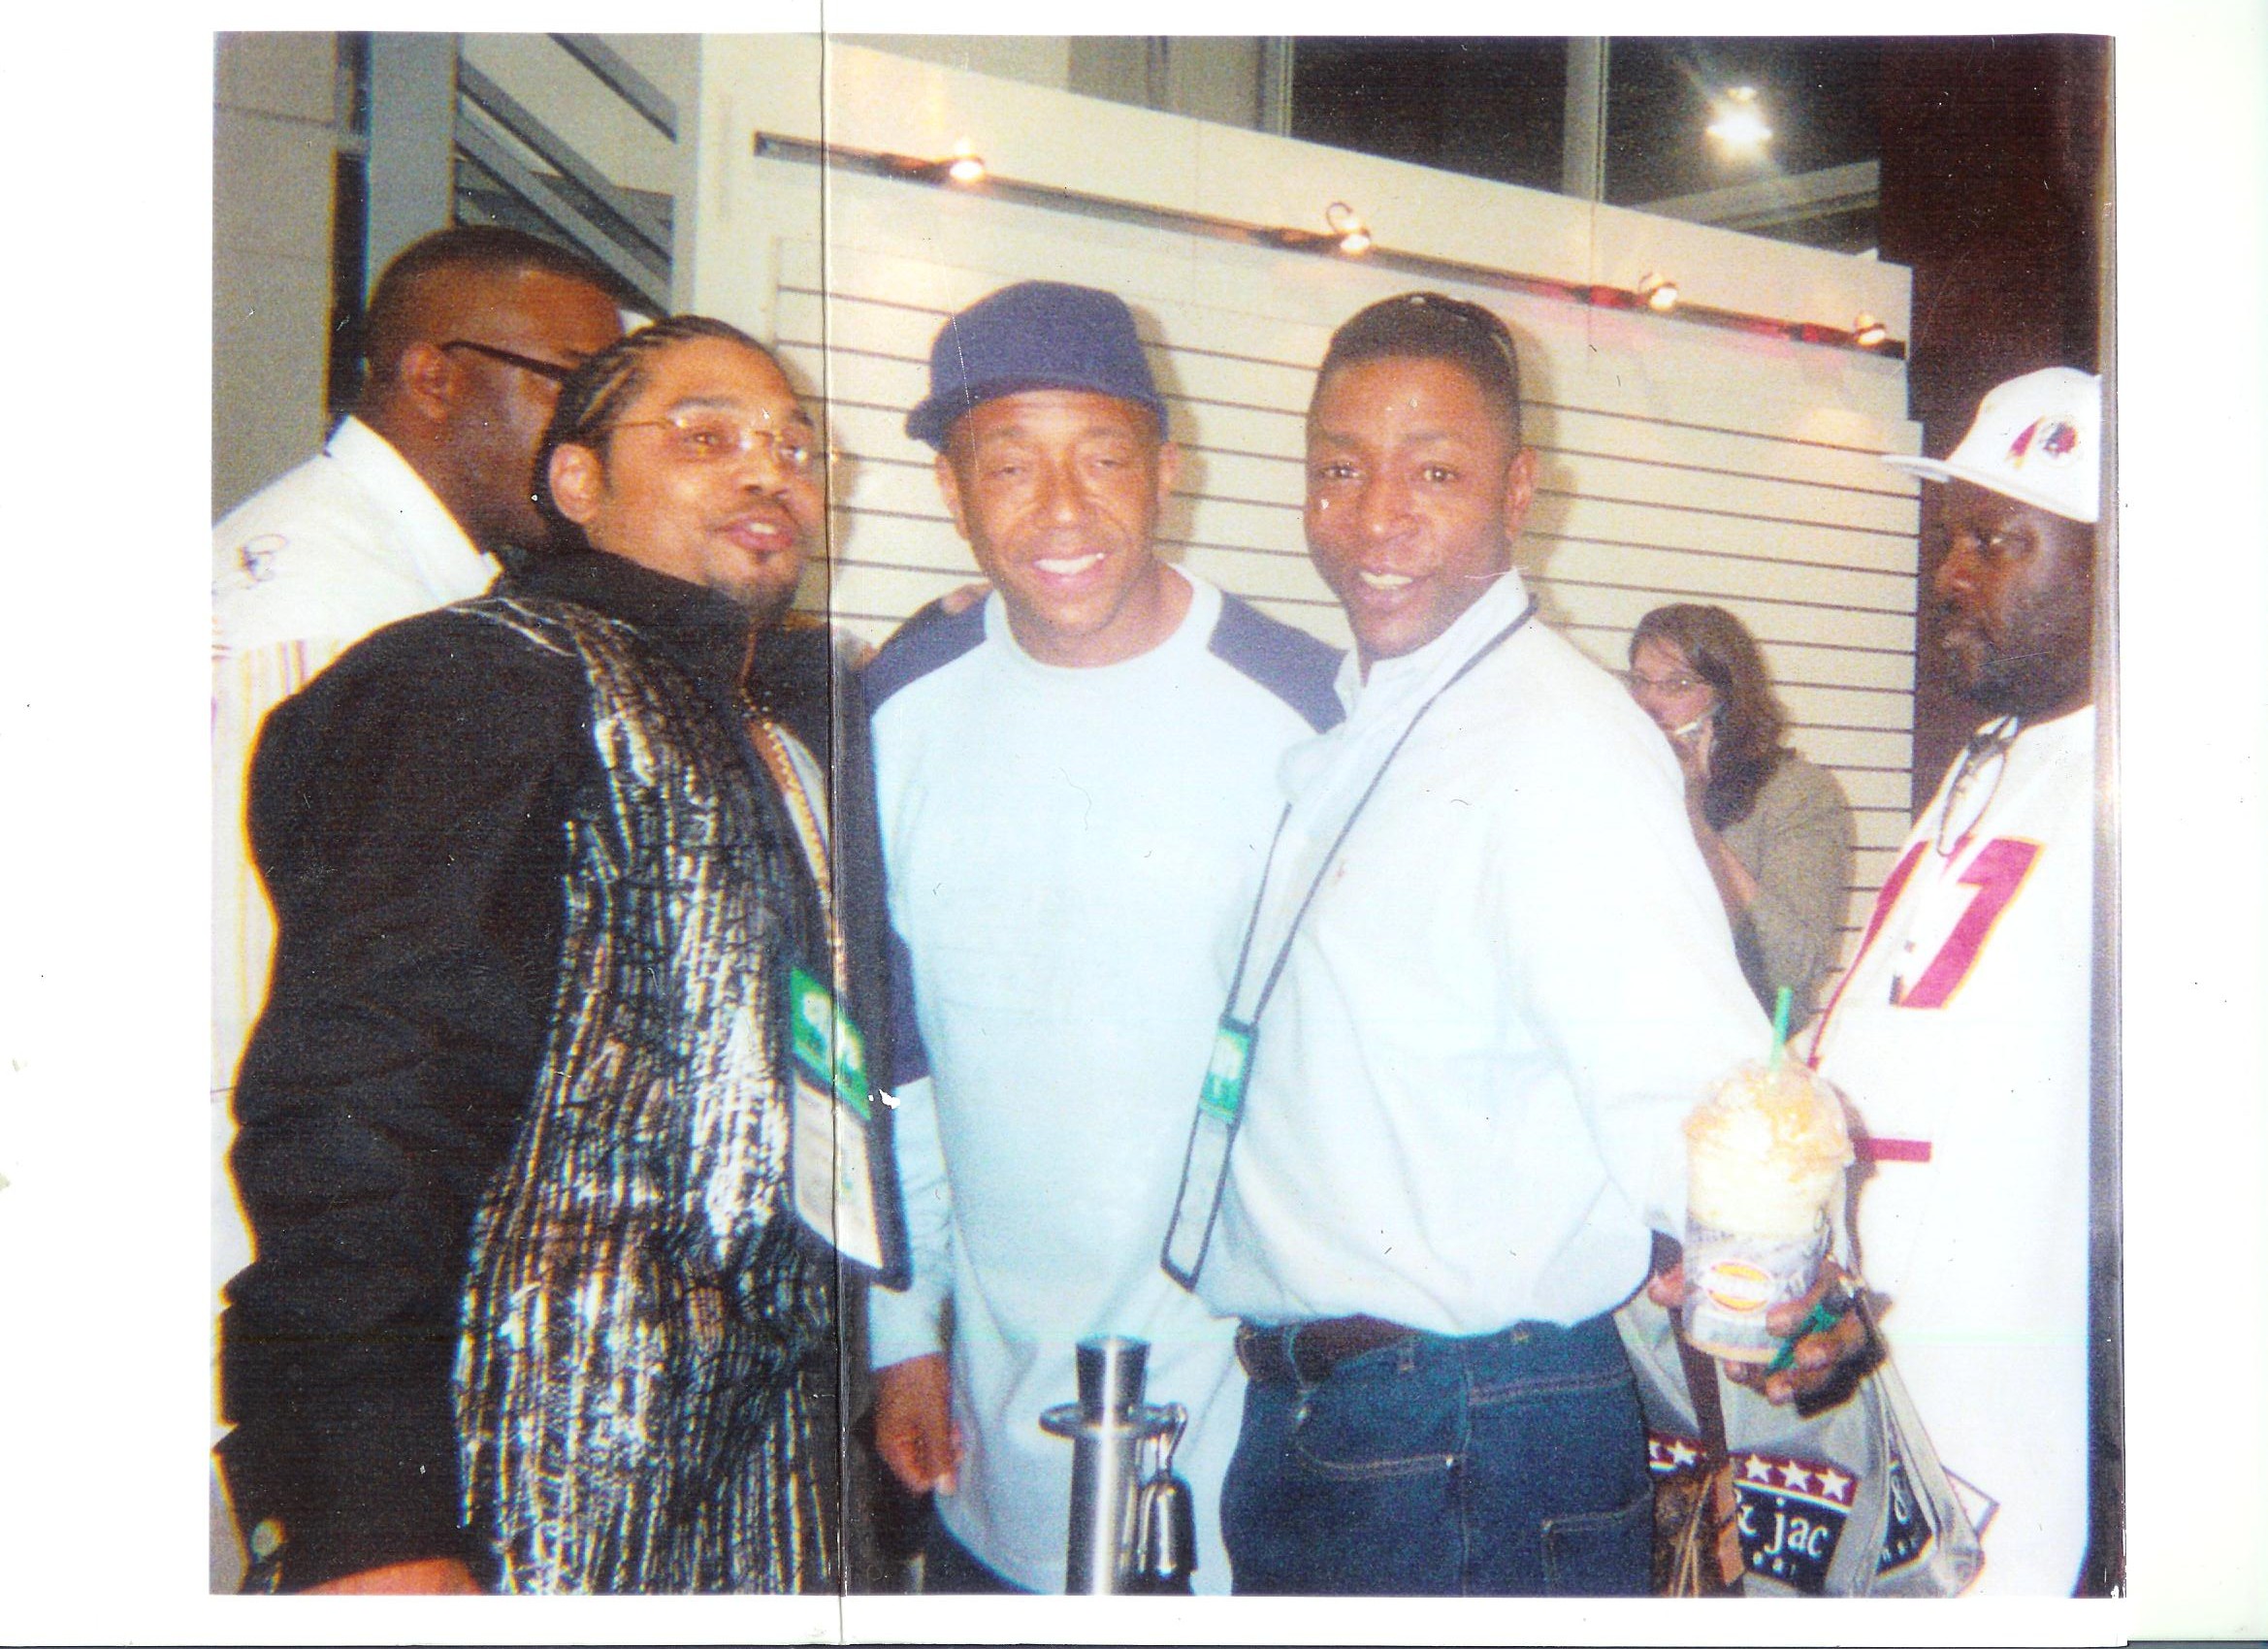 Courtney Brown, jr. Motown Mafia with Russell Simmons